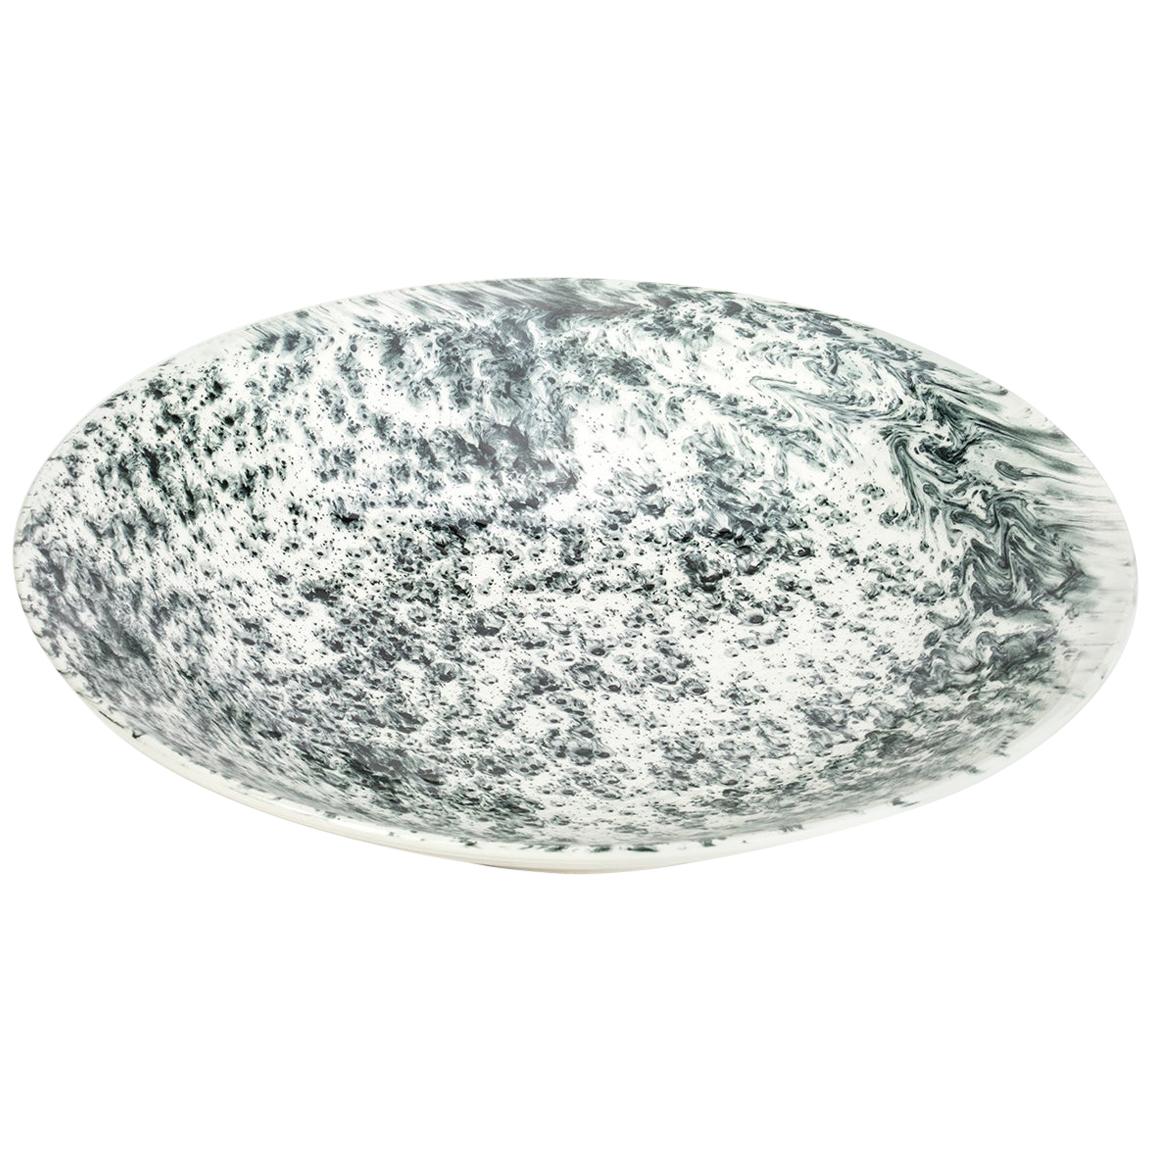 Hand Glazed Earthenware Large Serving Bowl with Unique Contemporary Design